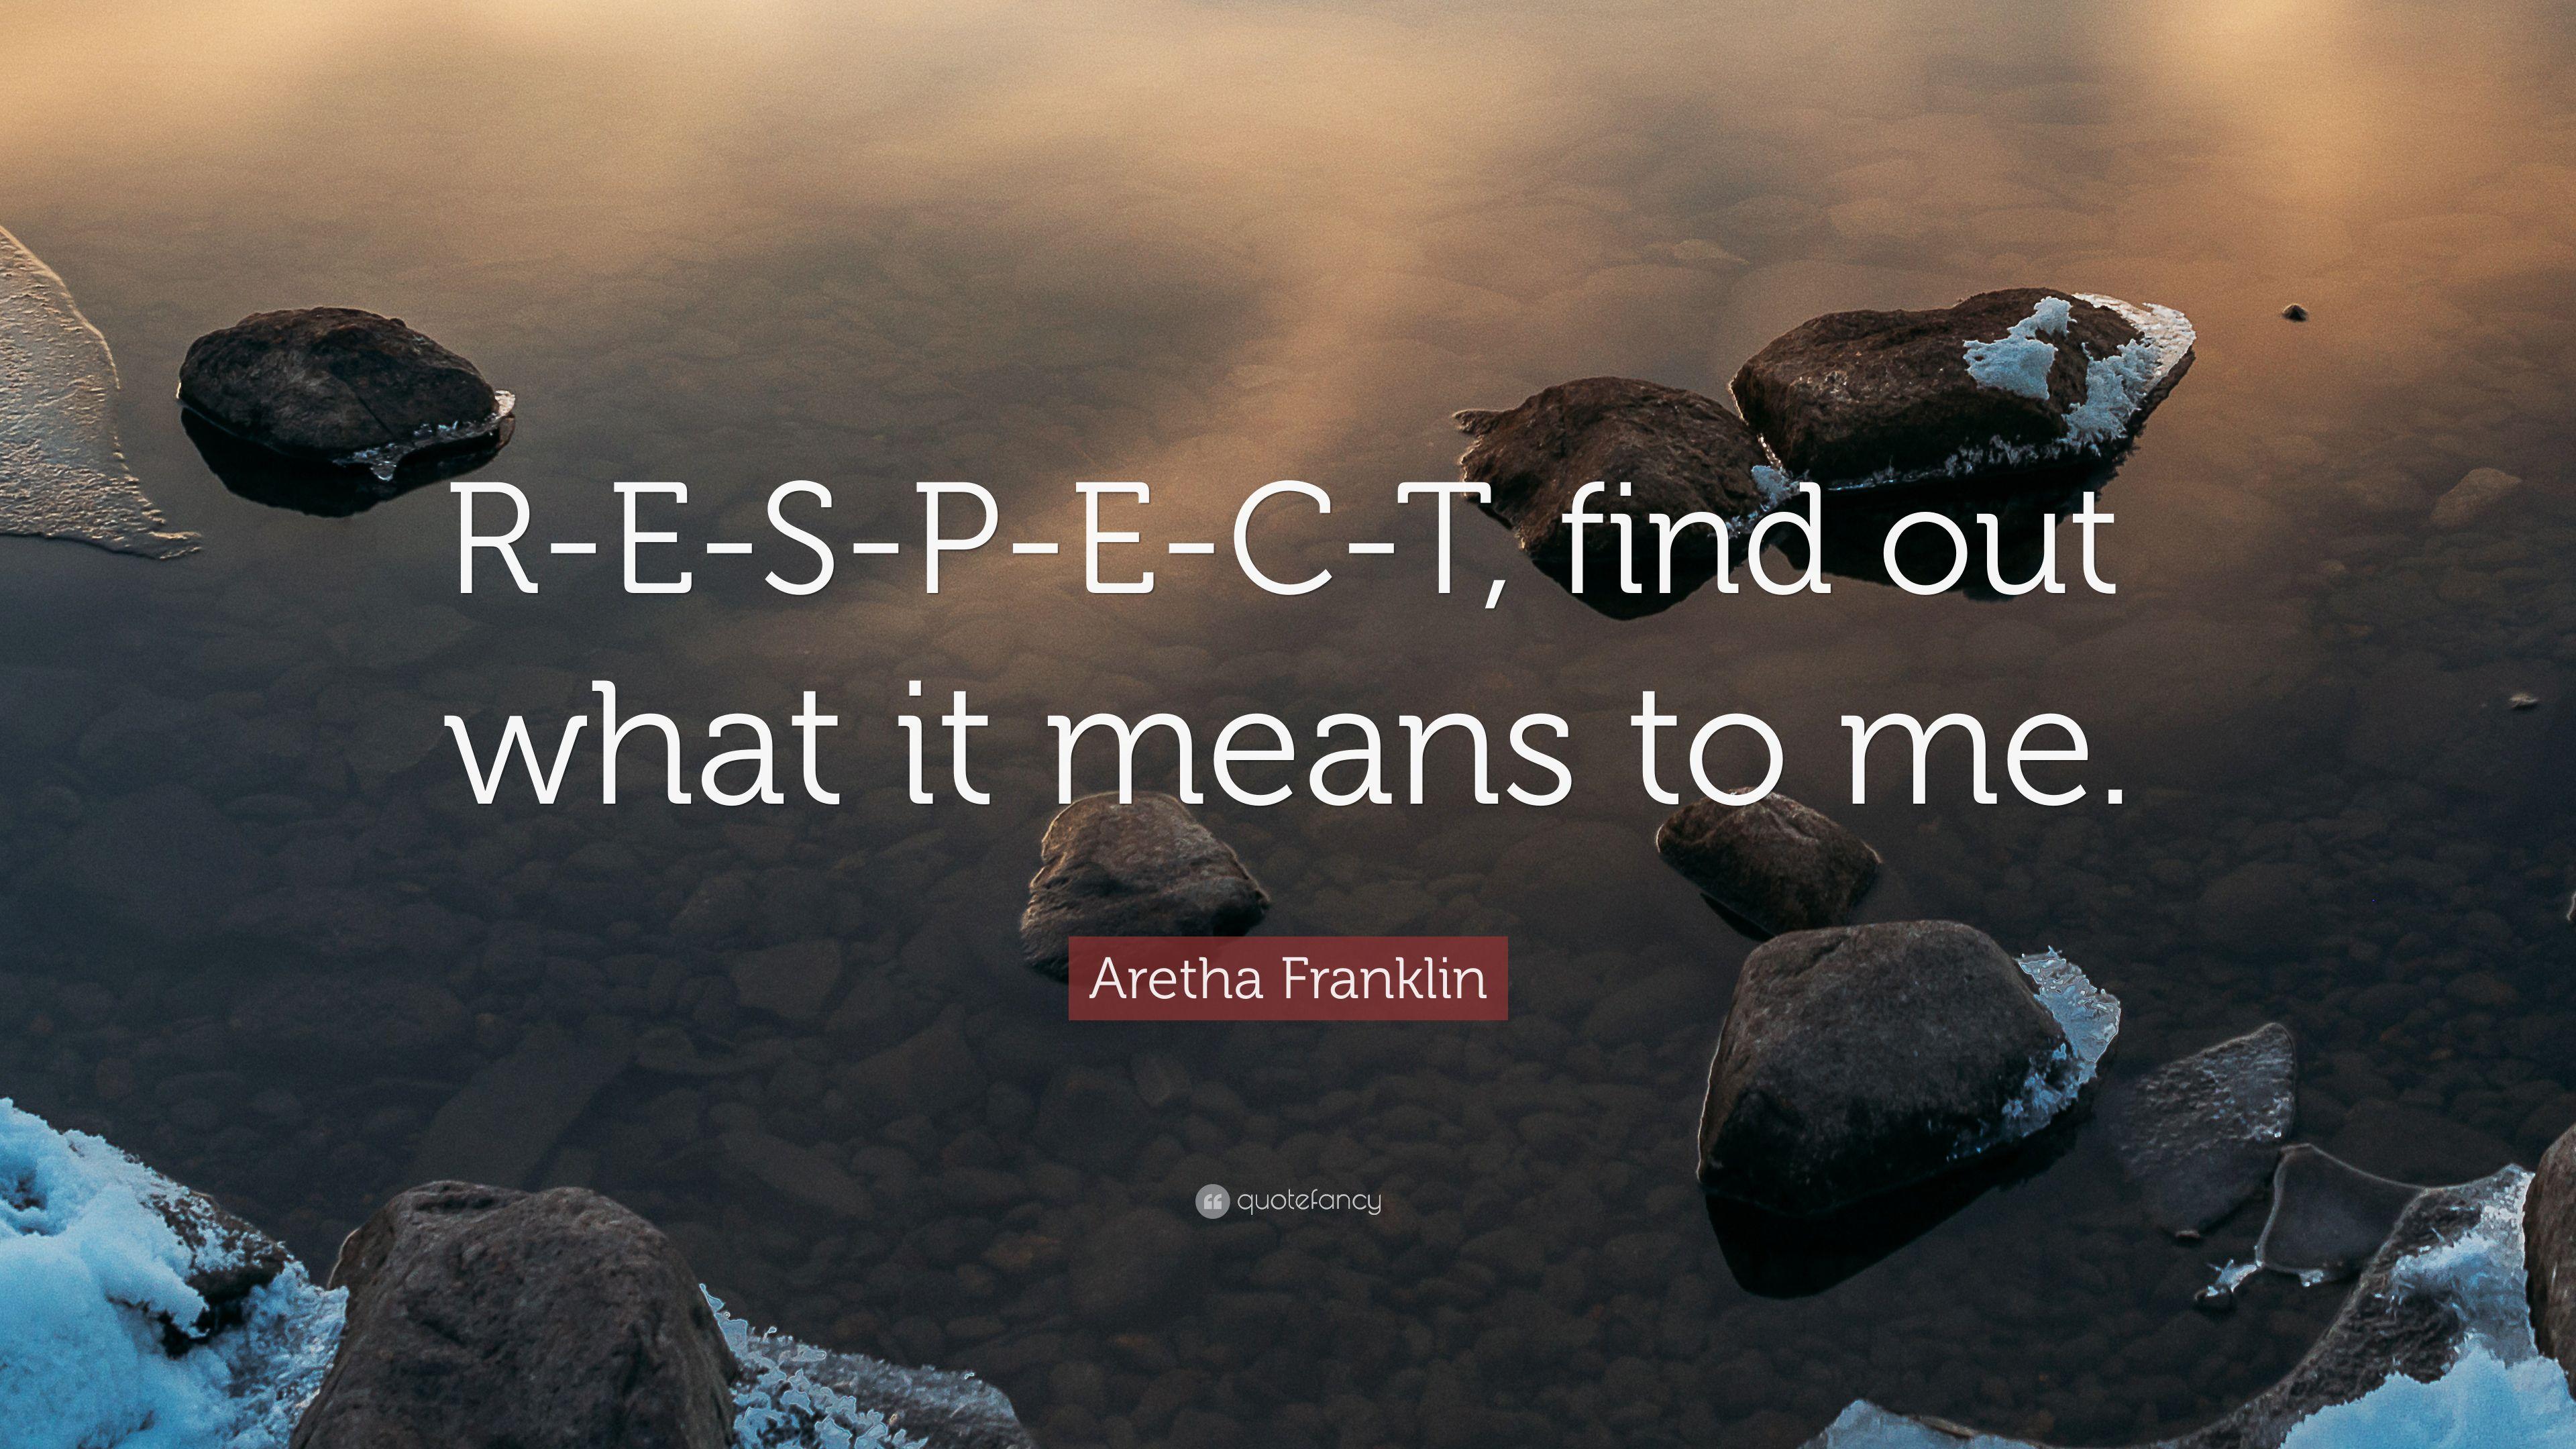 Aretha Franklin Quote: “R E S P E C T, Find Out What It Means To